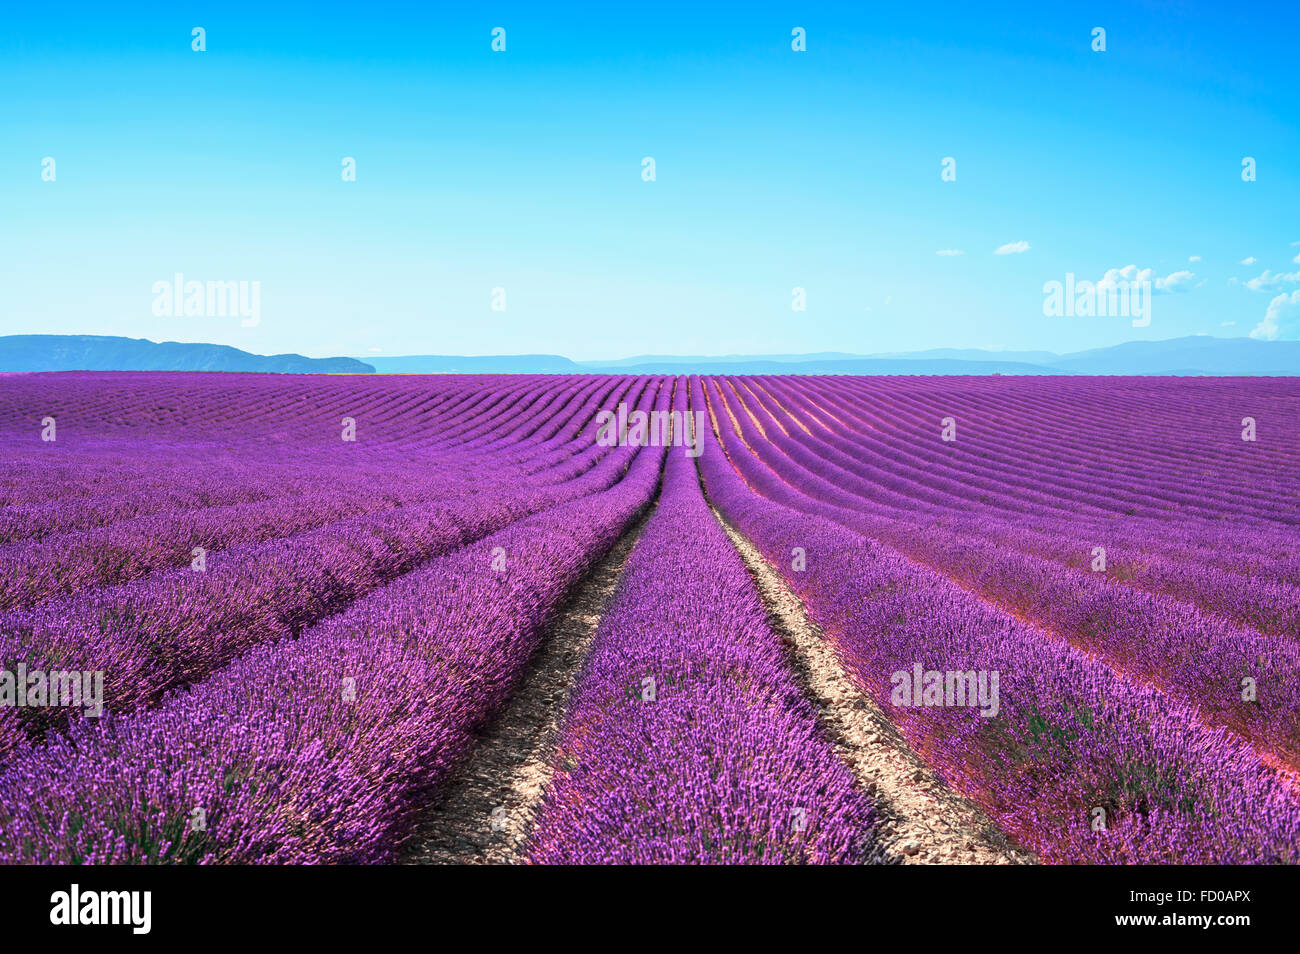 Lavender flower blooming scented fields in endless rows. Valensole plateau, provence, france, europe. Stock Photo